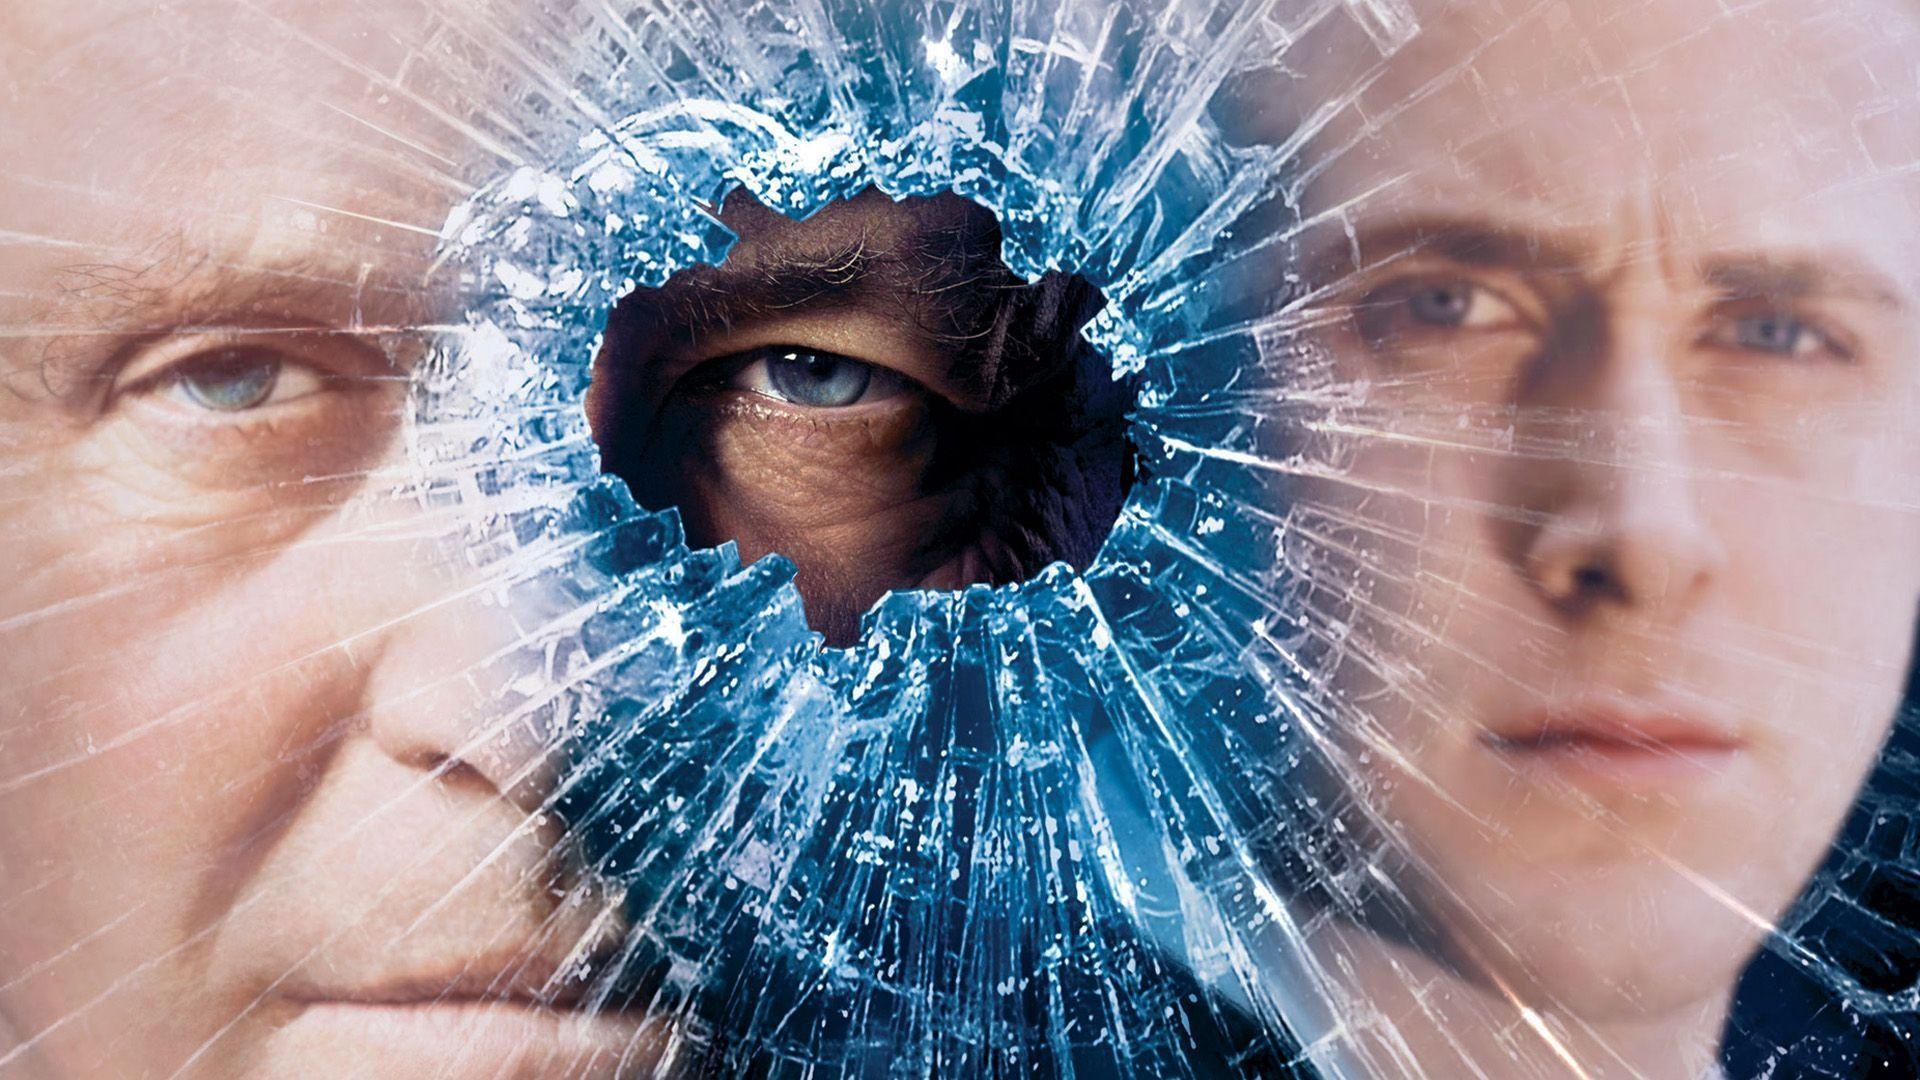 Download wallpaper 1920x1080 fracture, glass, hole, anthony hopkins